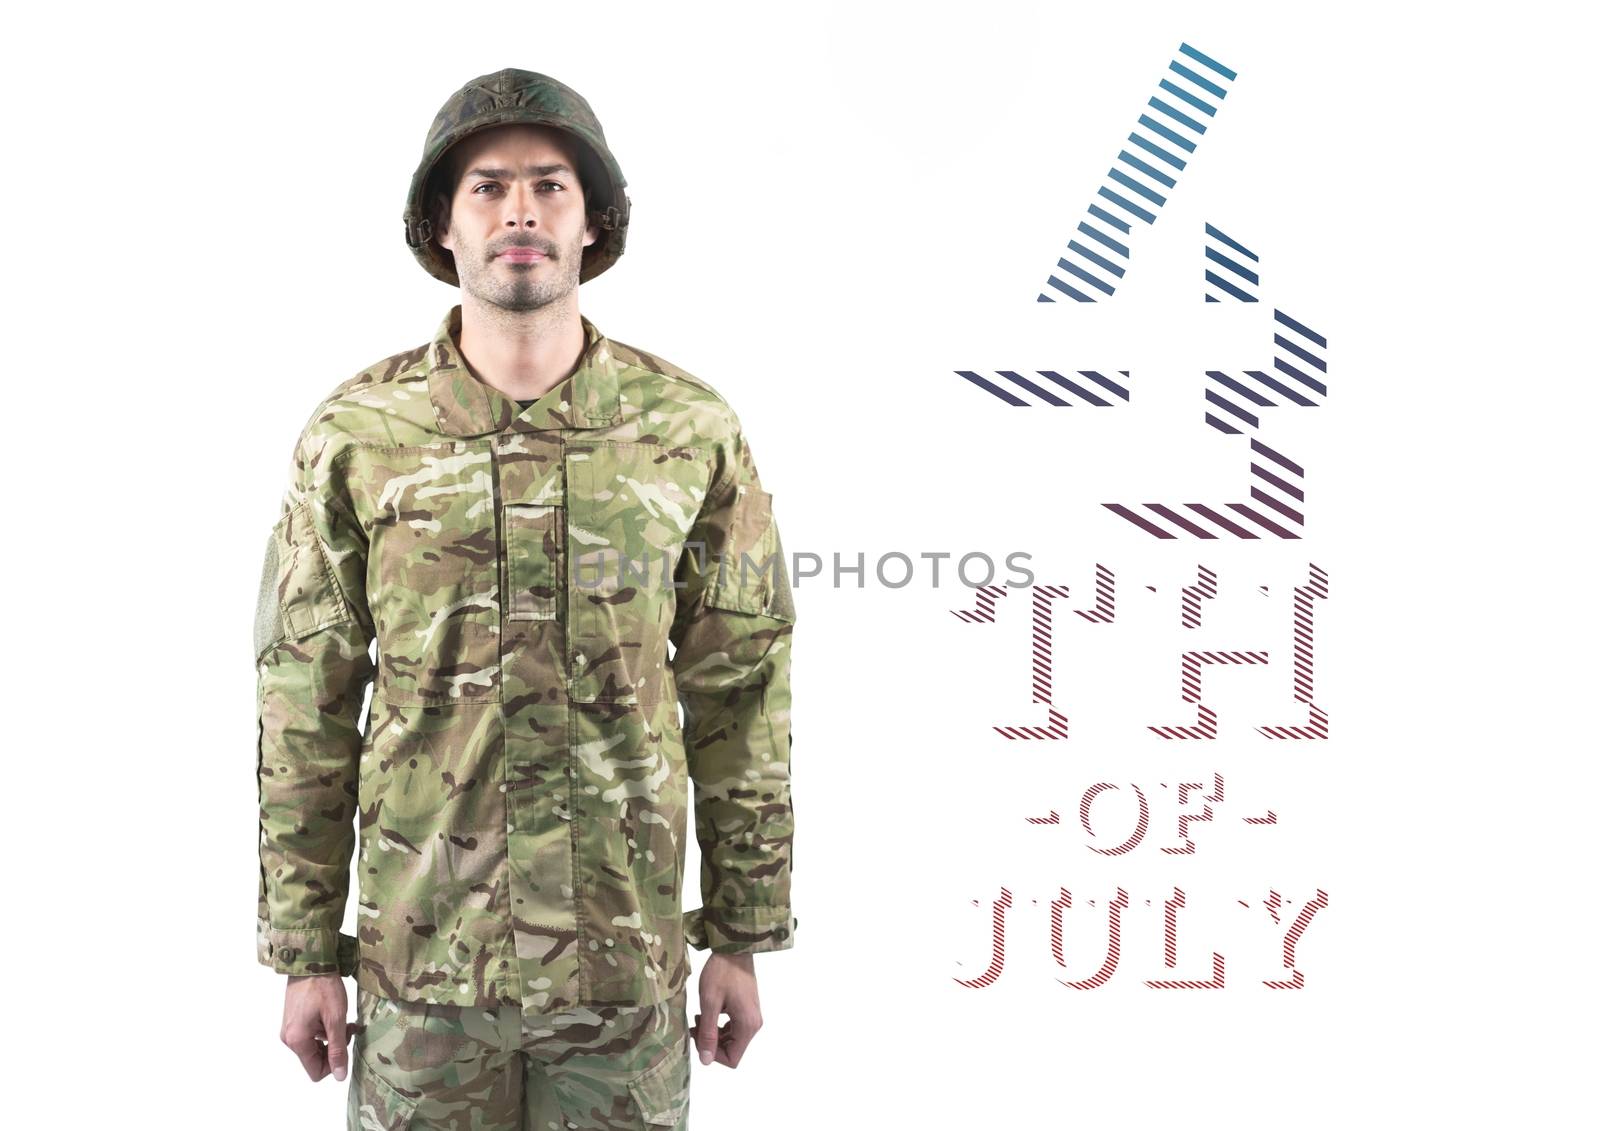 Digital composite of Proud soldier standing against 4th of July background